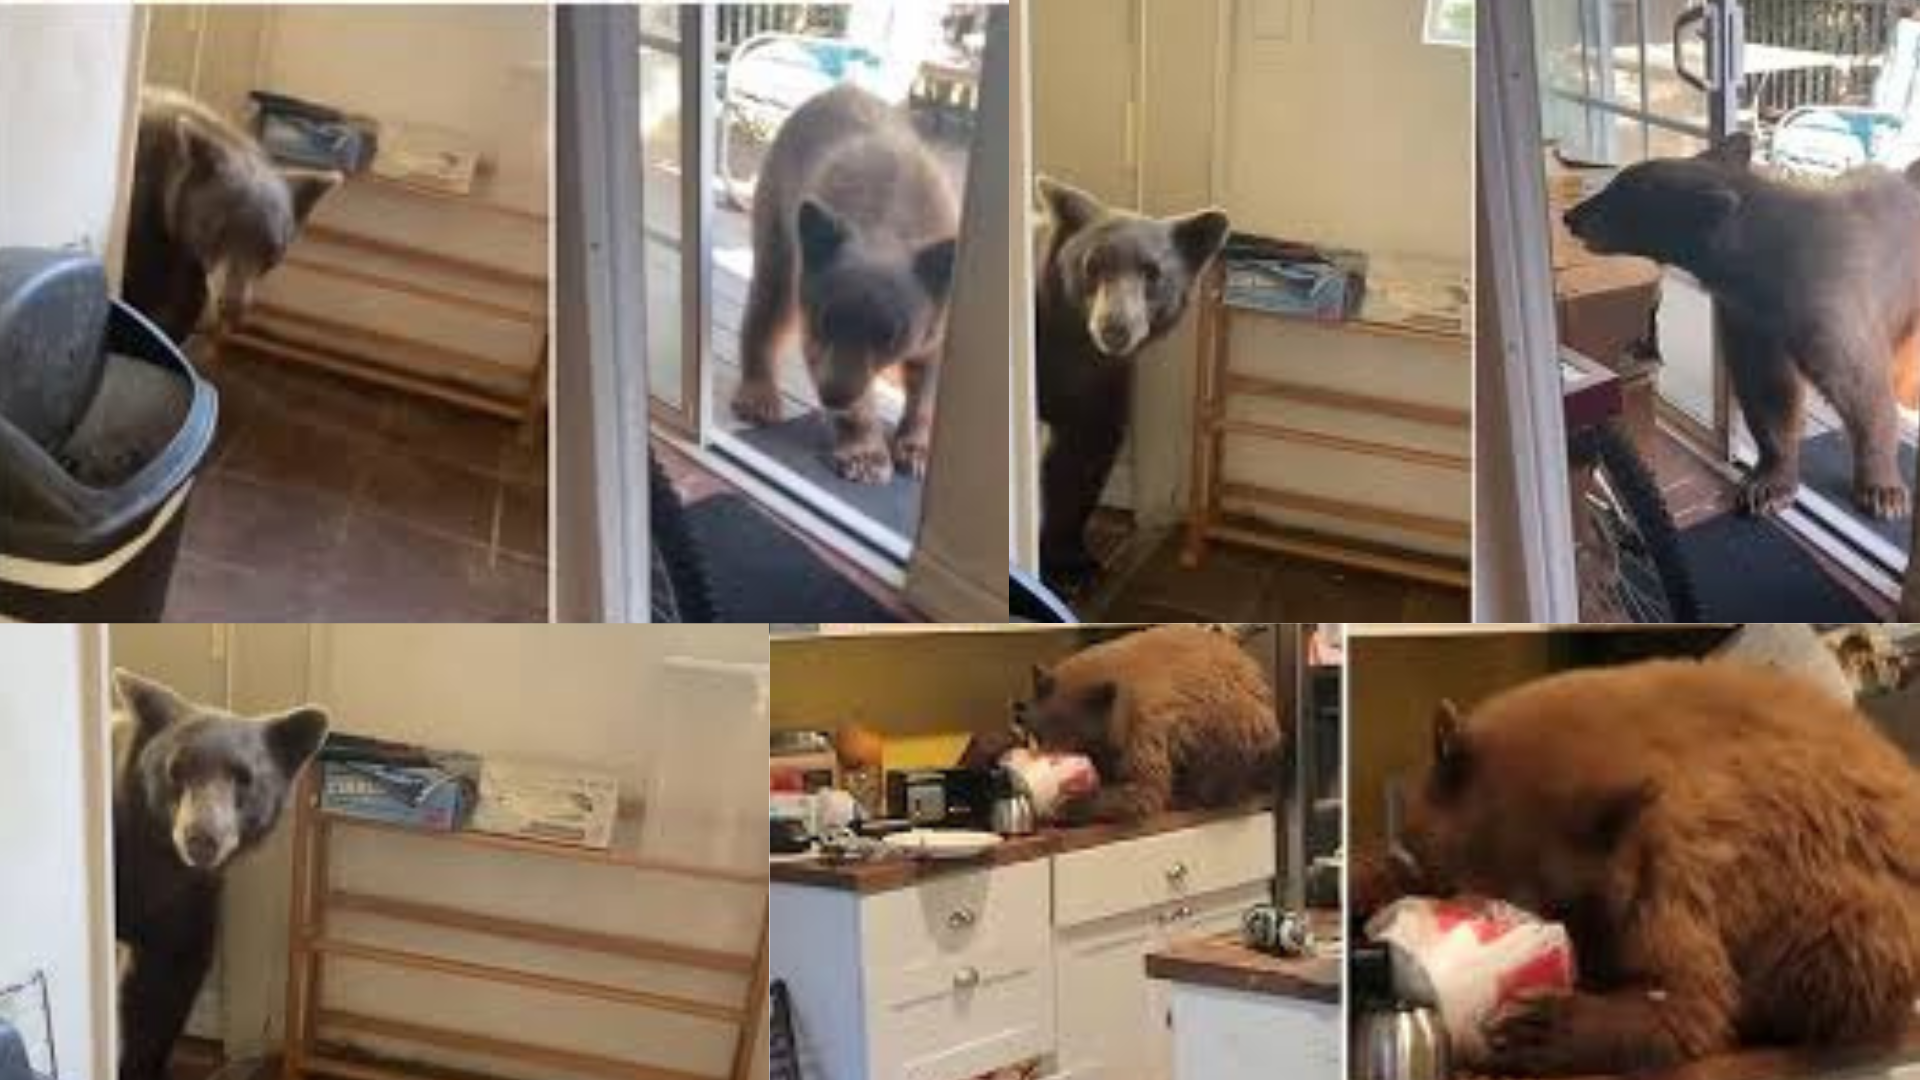 California Man’s Polite Encounter With Bear In Kitchen Goes Viral On Internet